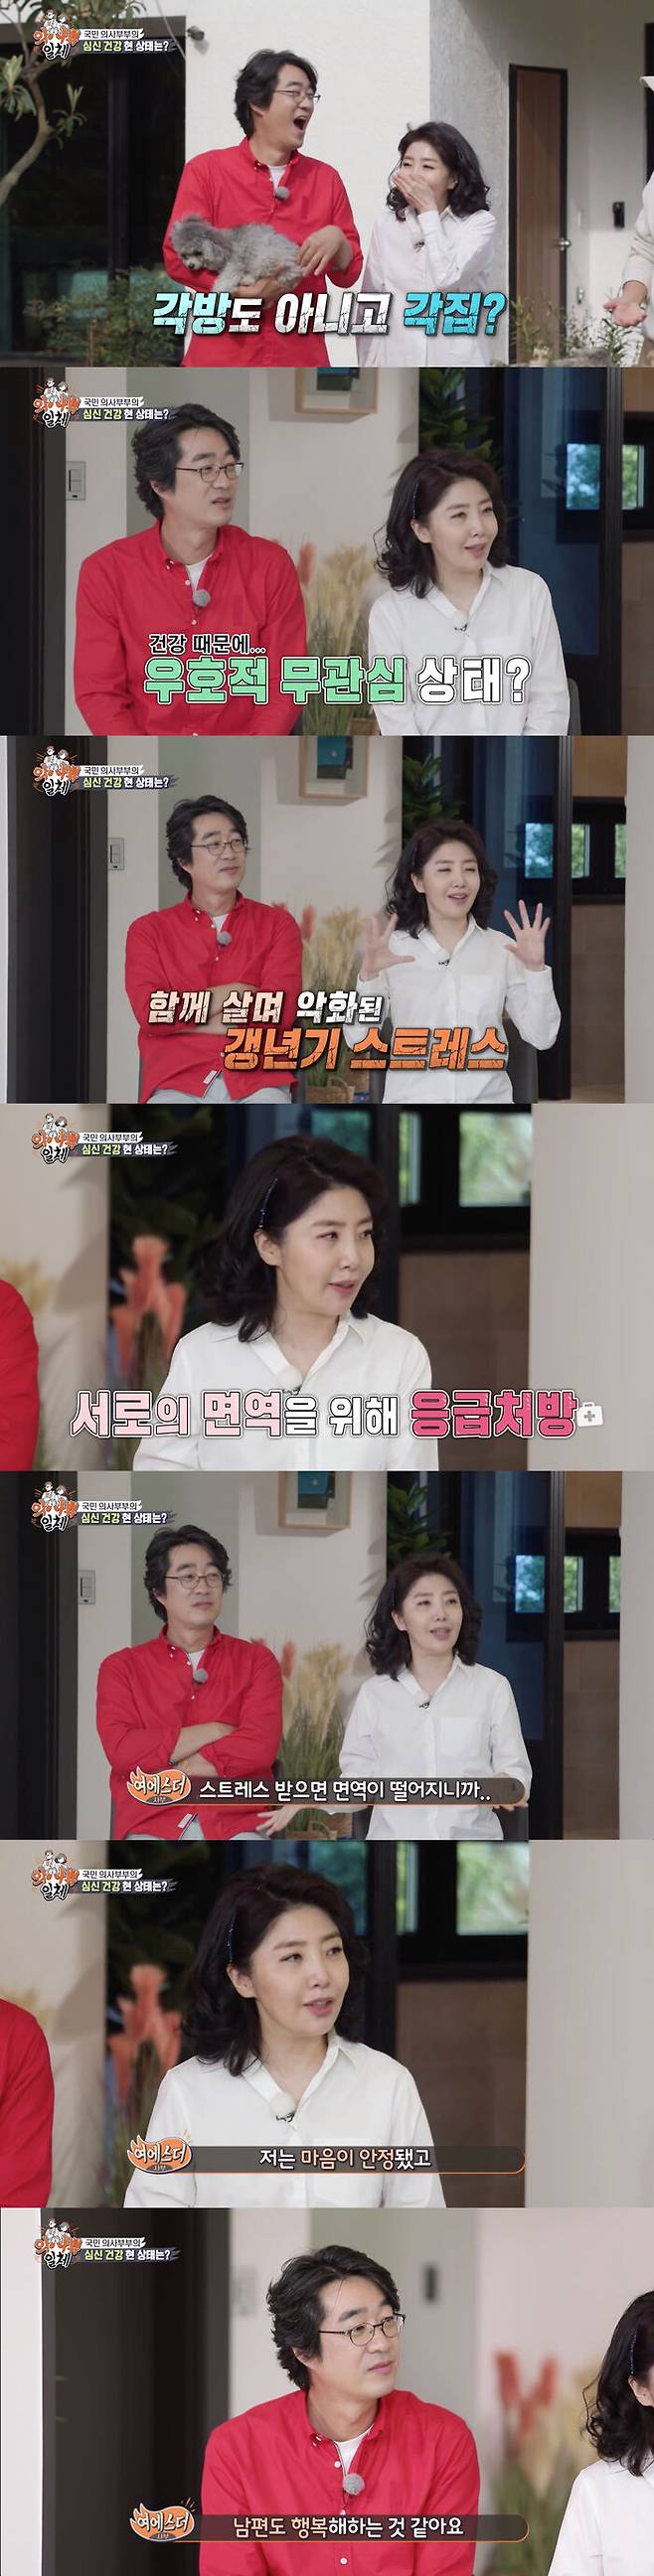 Yeo Esther reveals why she writes each book with HusbandOn the 5th SBS All The Butlers, the Yeo Esther Hong Hye-geol couple appeared as a sabu.On the day of the broadcast, the two people said they were currently writing various books.The members asked about the reason for writing each house, not each room.Yeo Esther then said: Because of the health, we both decided to remain in a friendly indifference state.As Menopausal became, I was hurt and stressed by each other with minor things.So I thought it would be better to live separately and I am writing a book for each others Immunity. It is a measure taken because Immunity is lowered when I am stressed. So Yoo Soo-bin actually asked if the health improved while writing each house.Yeo Esther said, Yes, and said, I am stable and Husband is happy.